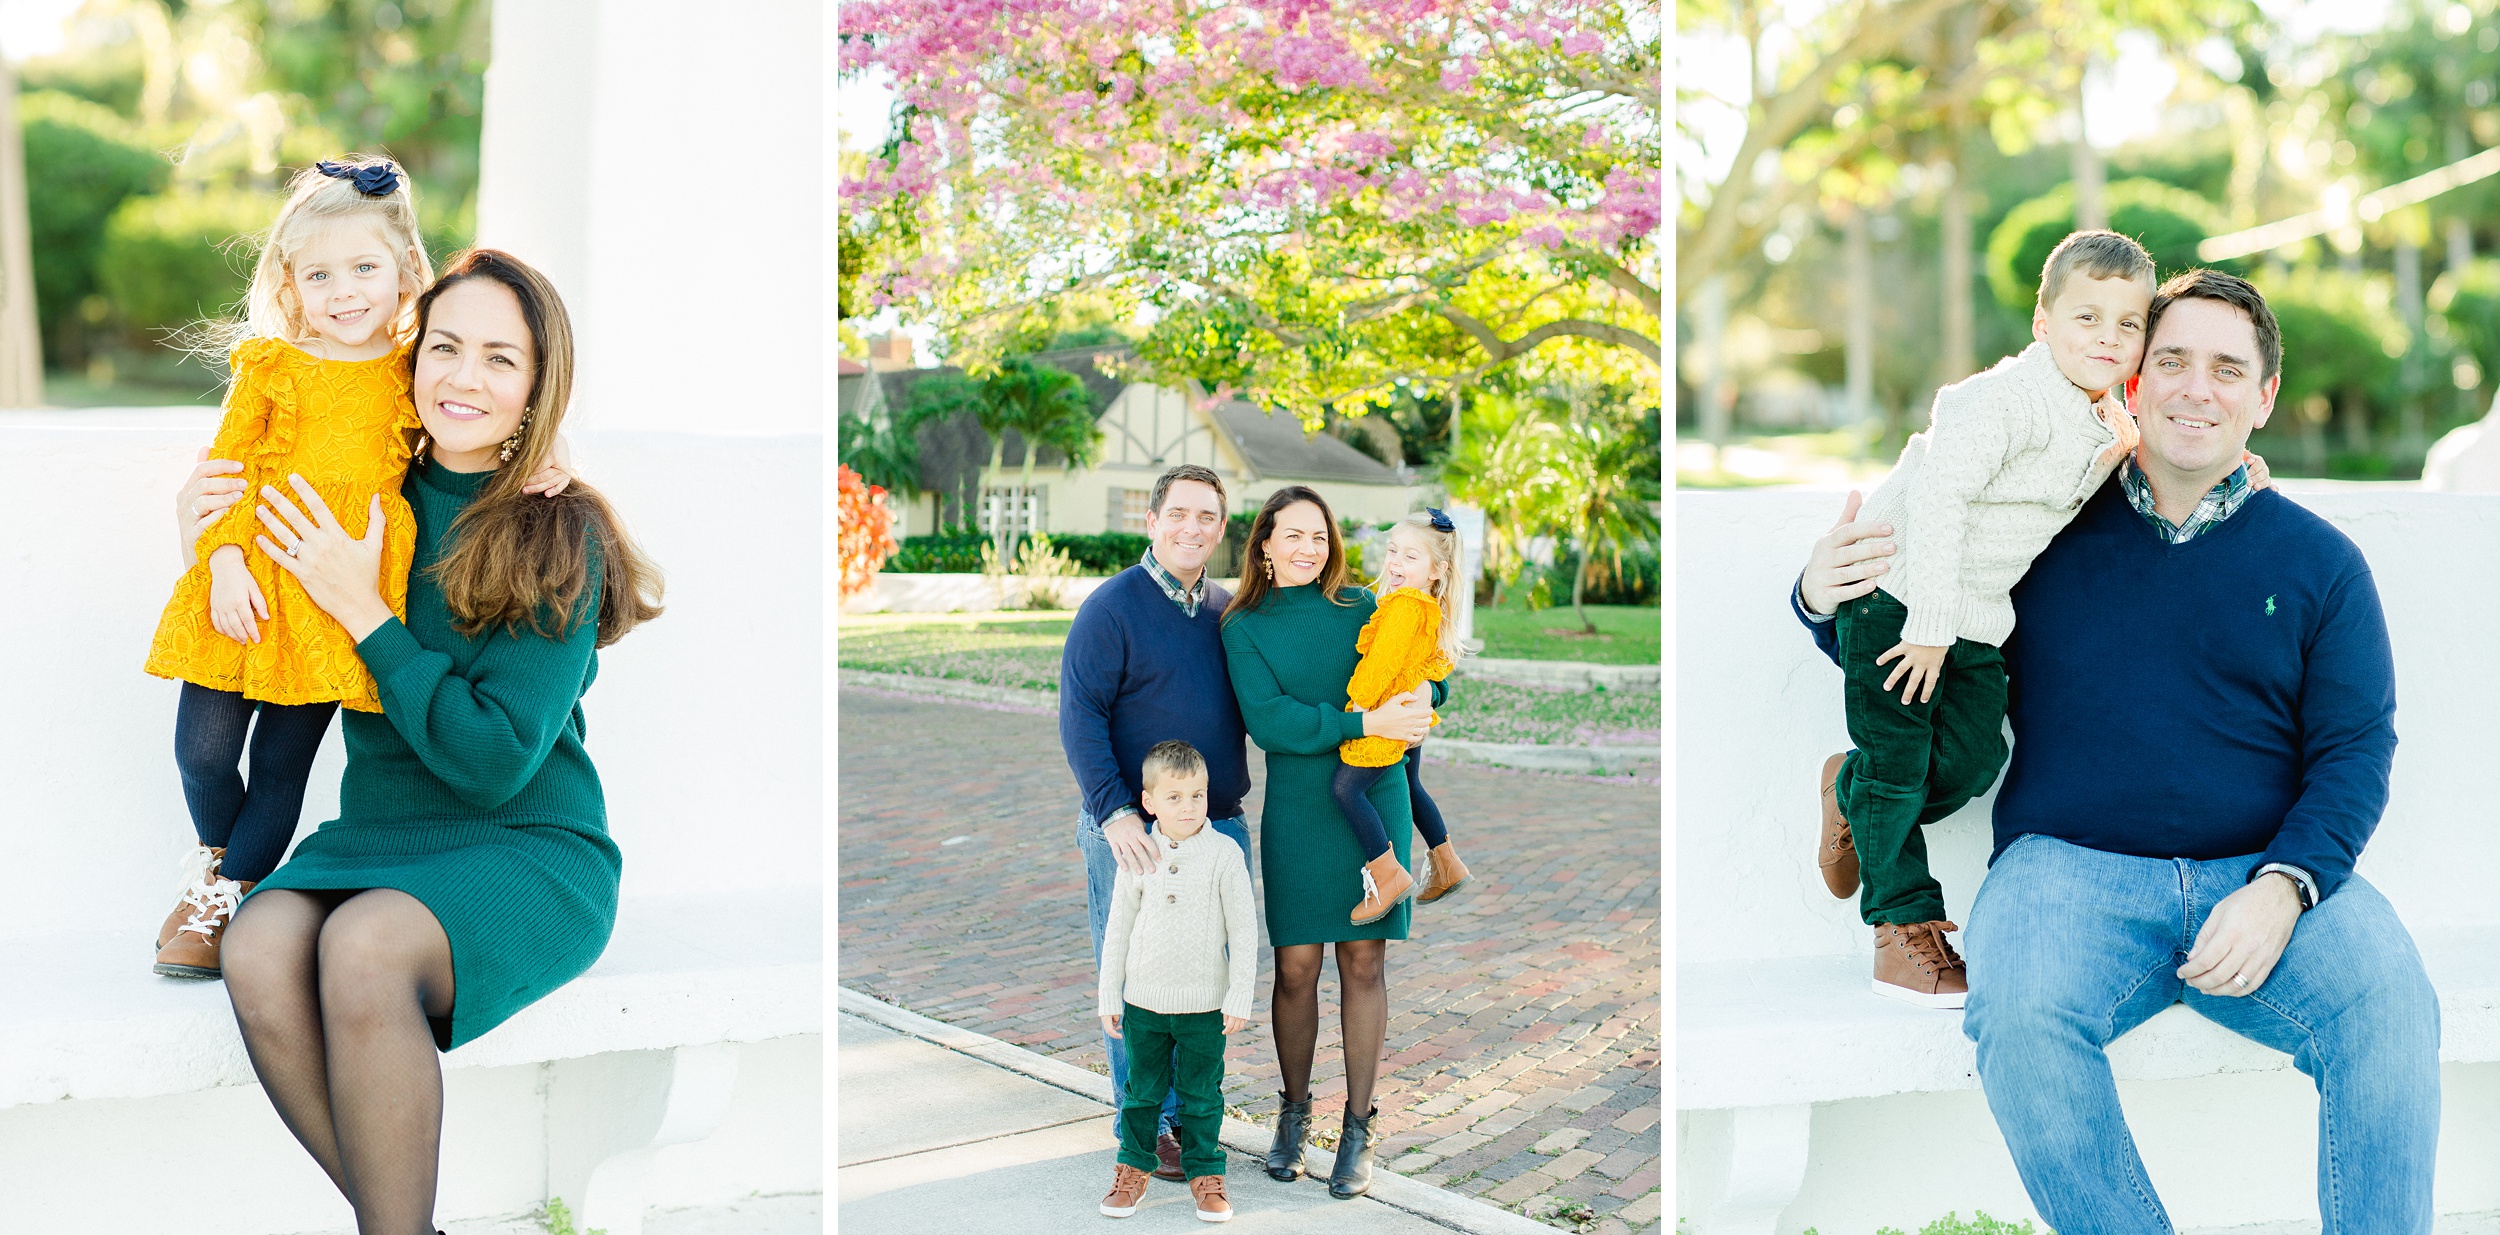 Tampa Family Photographer | © Ailyn La Torre Photography 2020